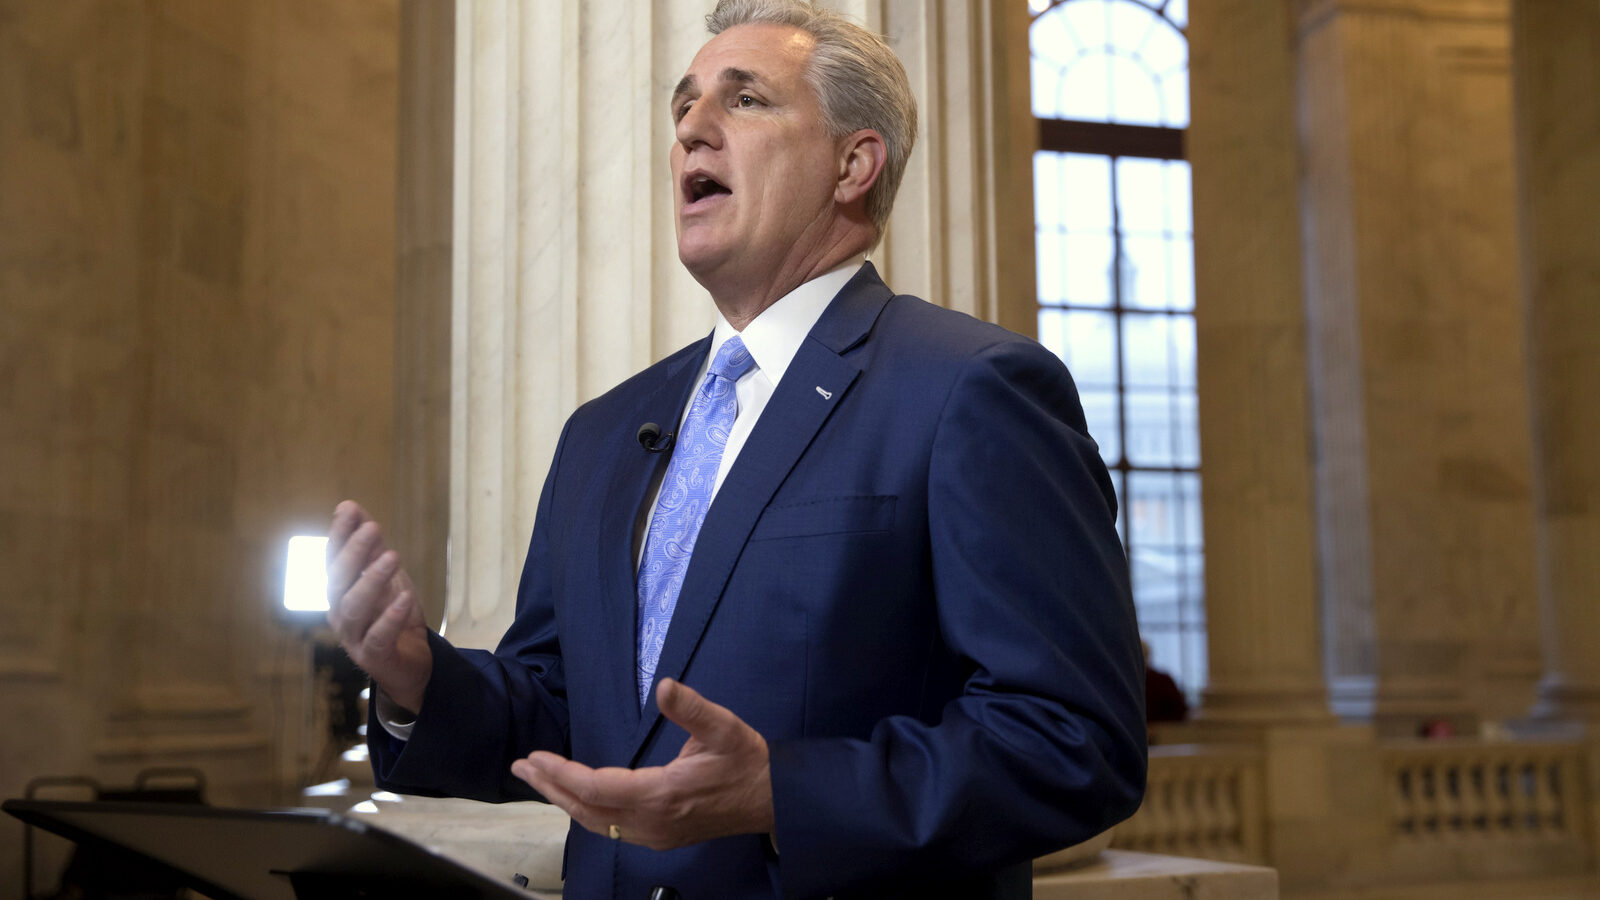 House Majority Leader Kevin McCarthy of Calif. discusses the move by House Republicans to eviscerate the independent Office of Government Ethics, during a network television interview on Capitol Hill in Washington, Tuesday, Jan. 3, 2017. (AP/J. Scott Applewhite)